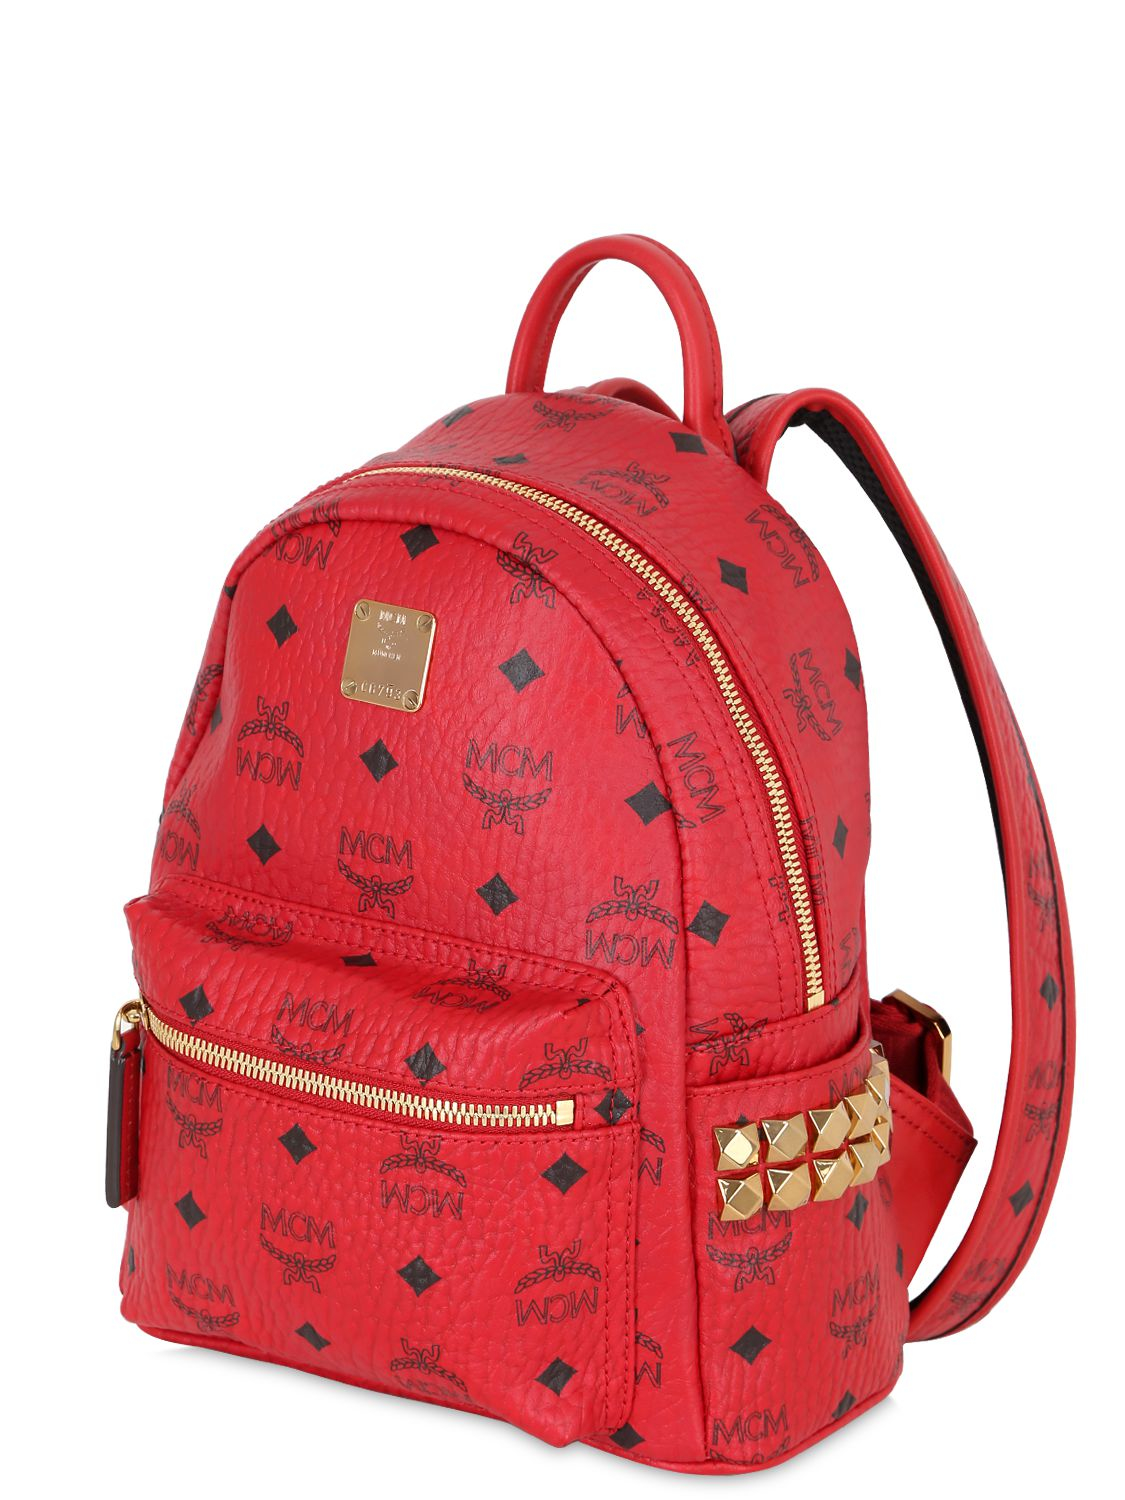 Lyst - Mcm Mini Stark Faux Leather Backpack in Red